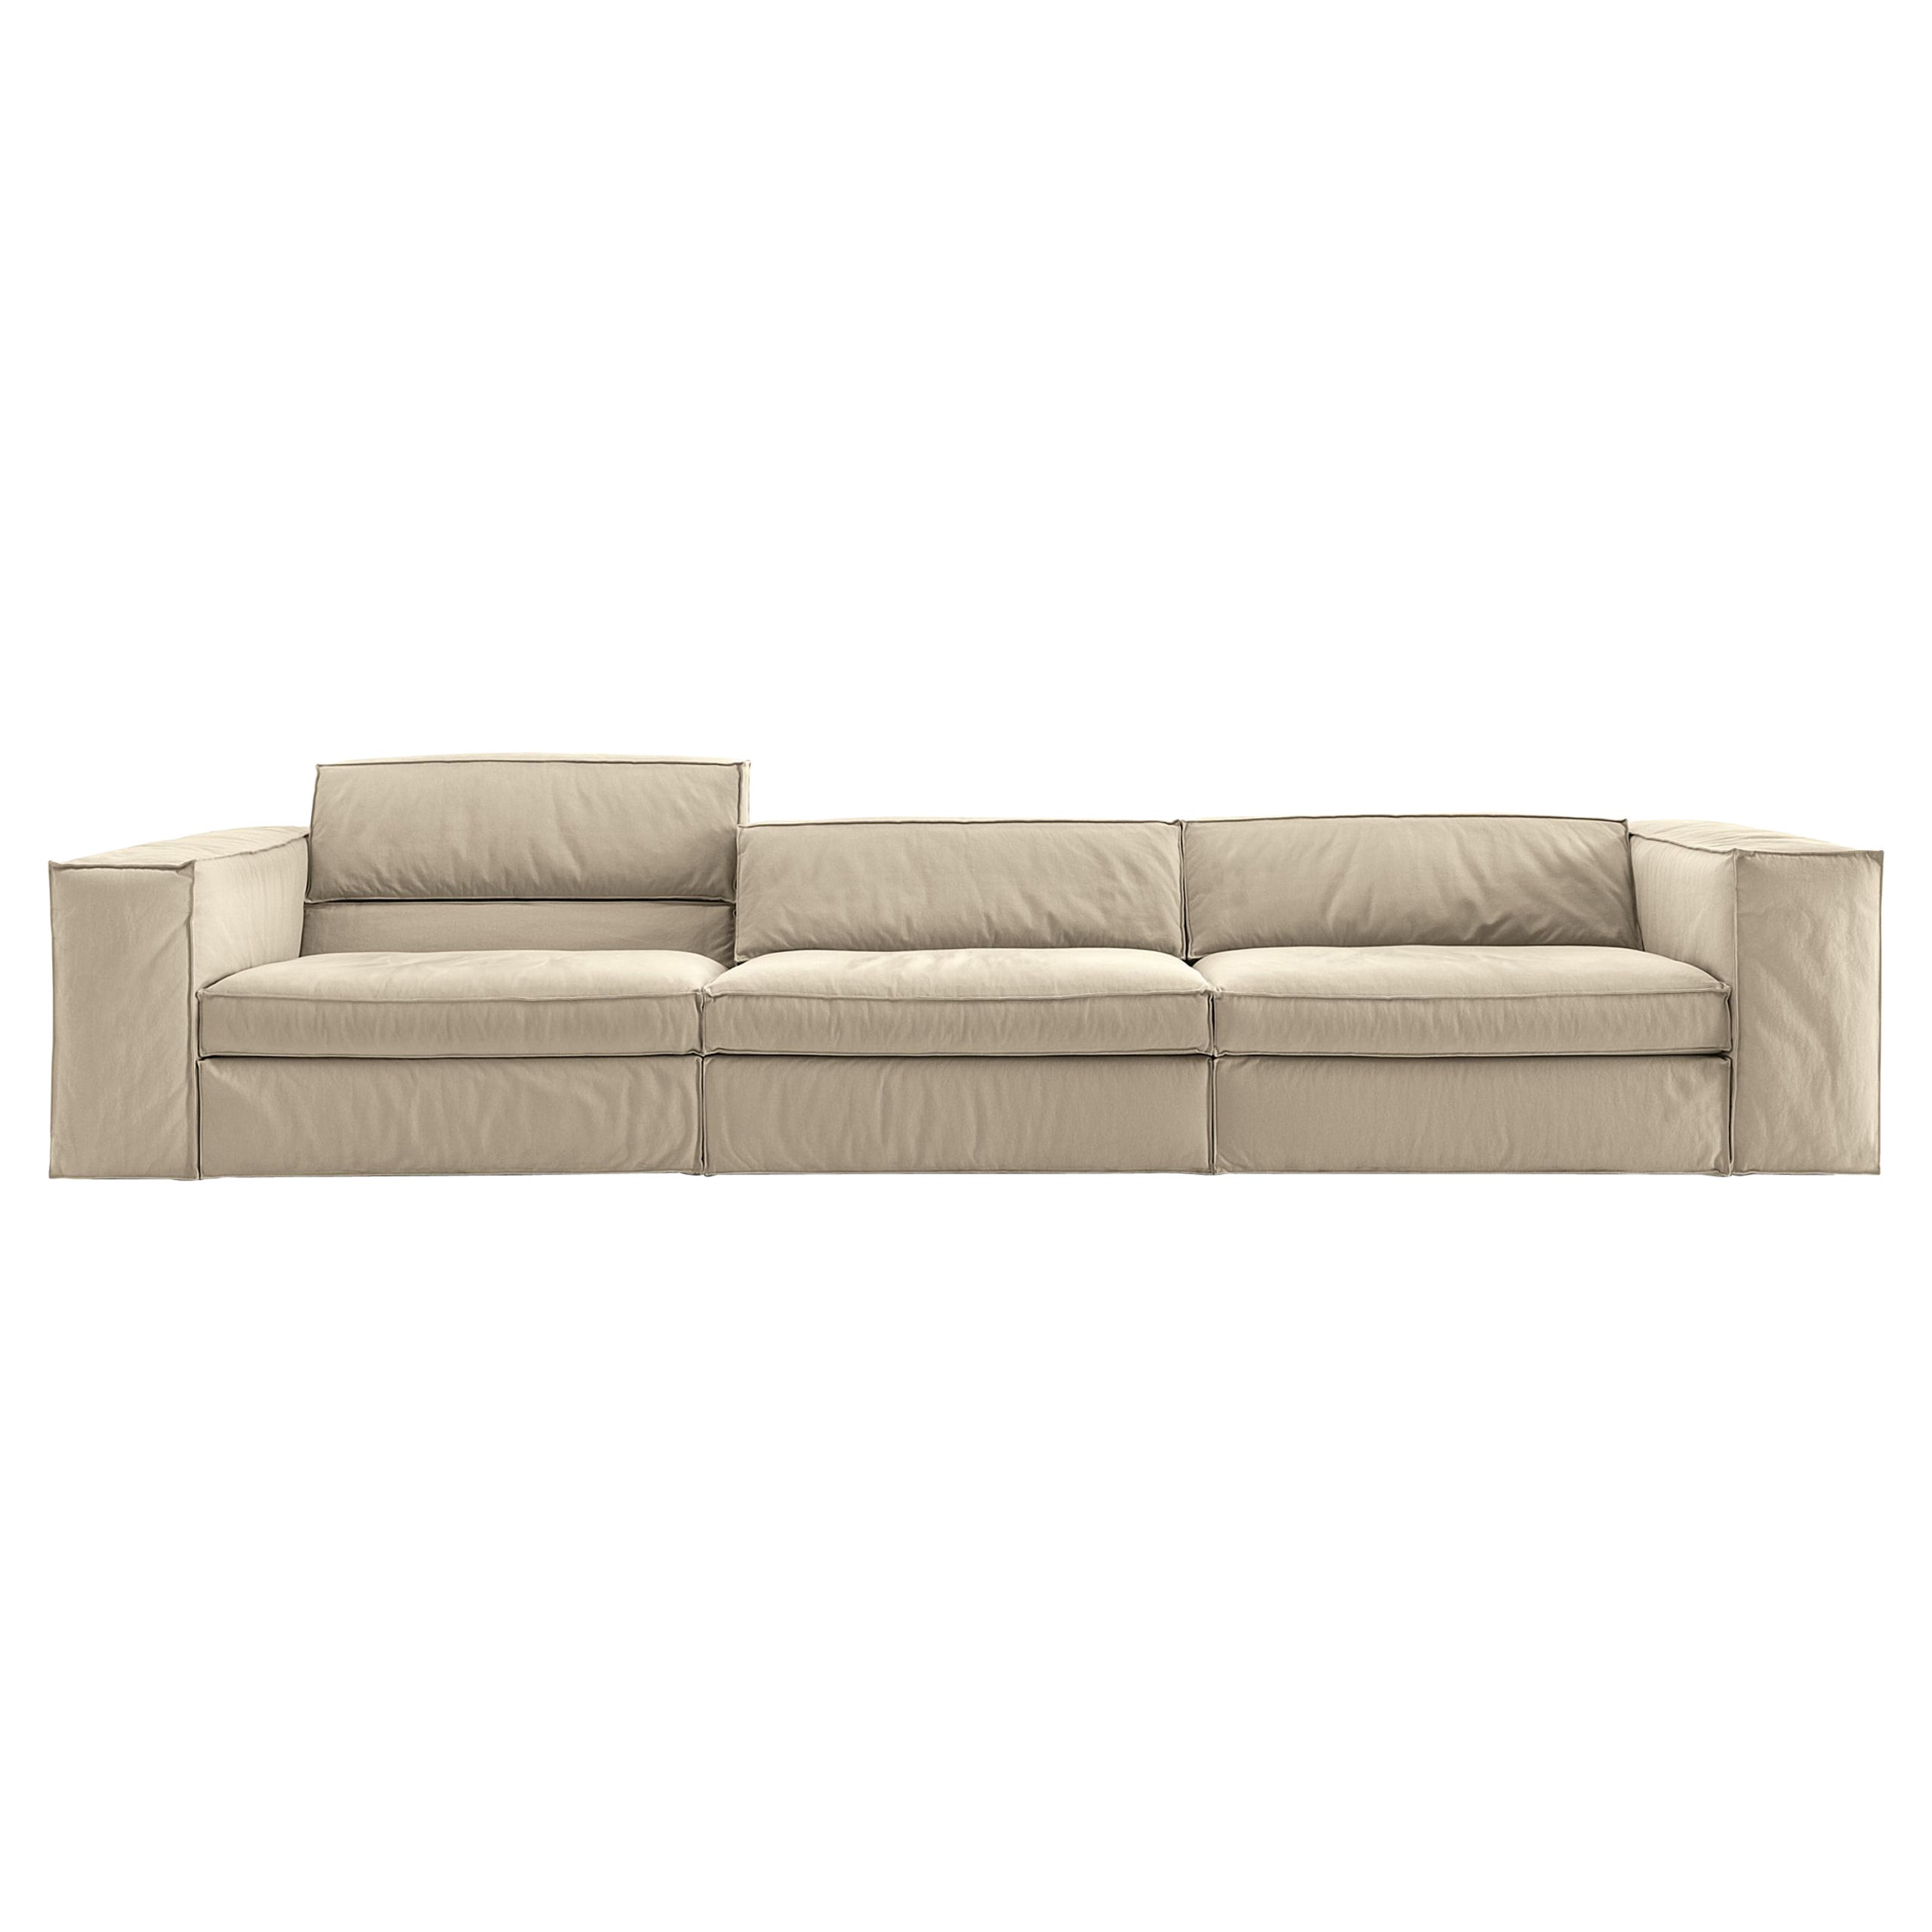 Up Small Modular Sofa in AT192 Beige Upholstery by Giuseppe Viganò For Sale